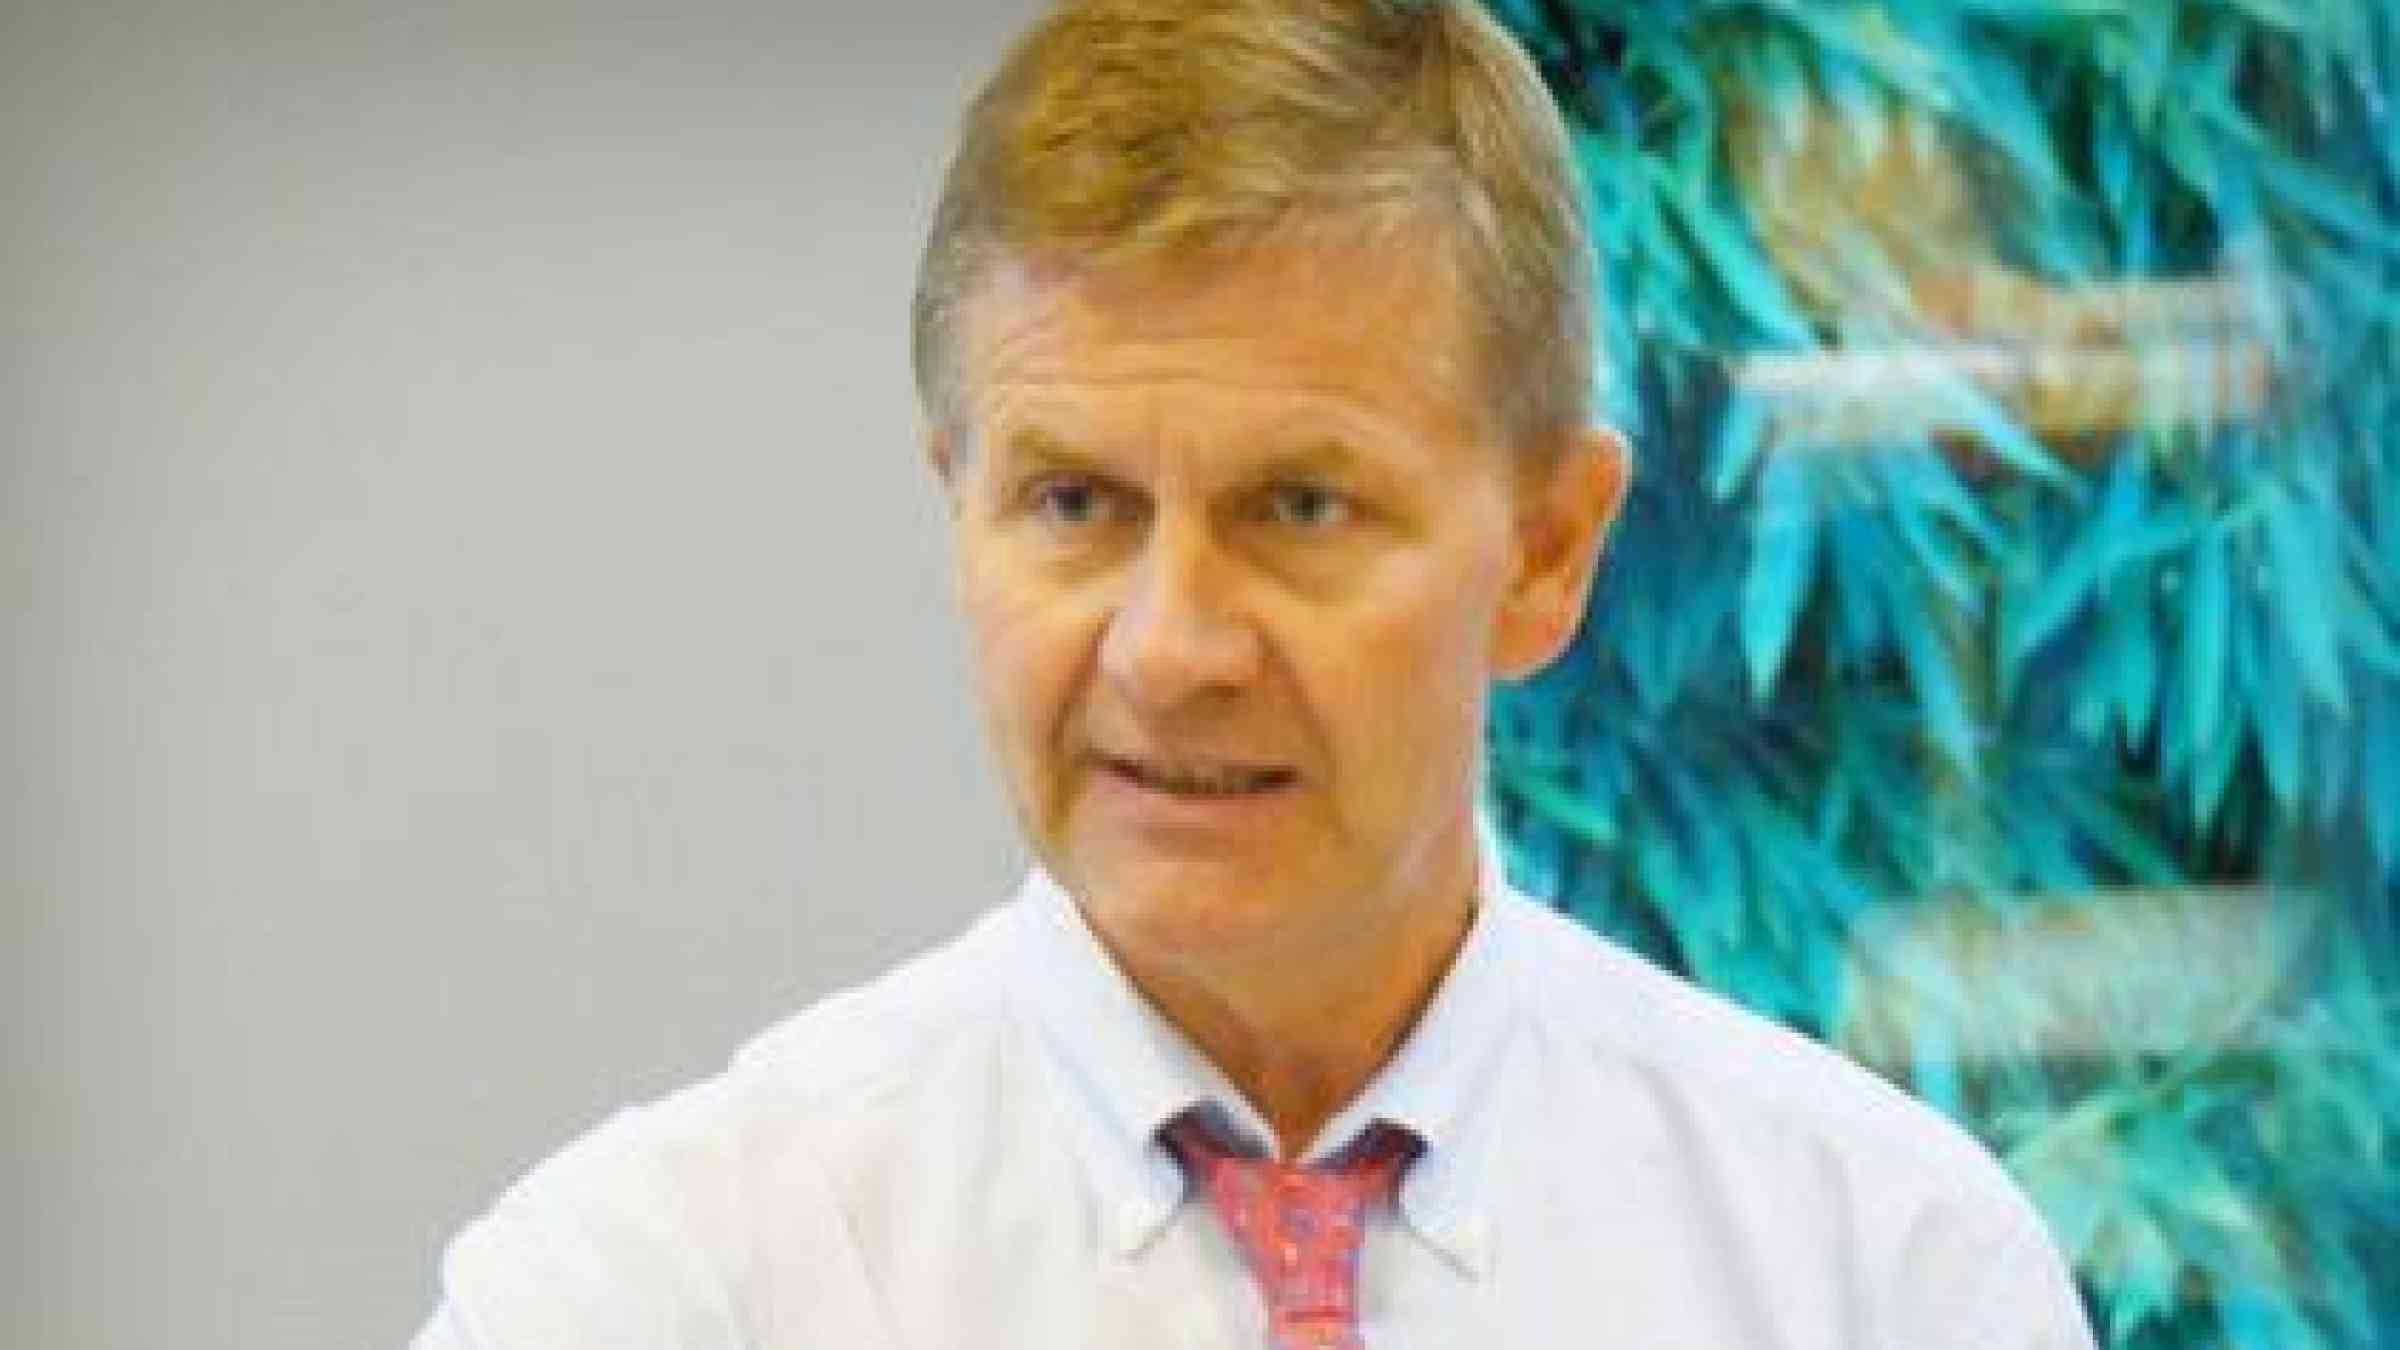 Erik Solheim, the Chair of the OECD Development Assistance Committee